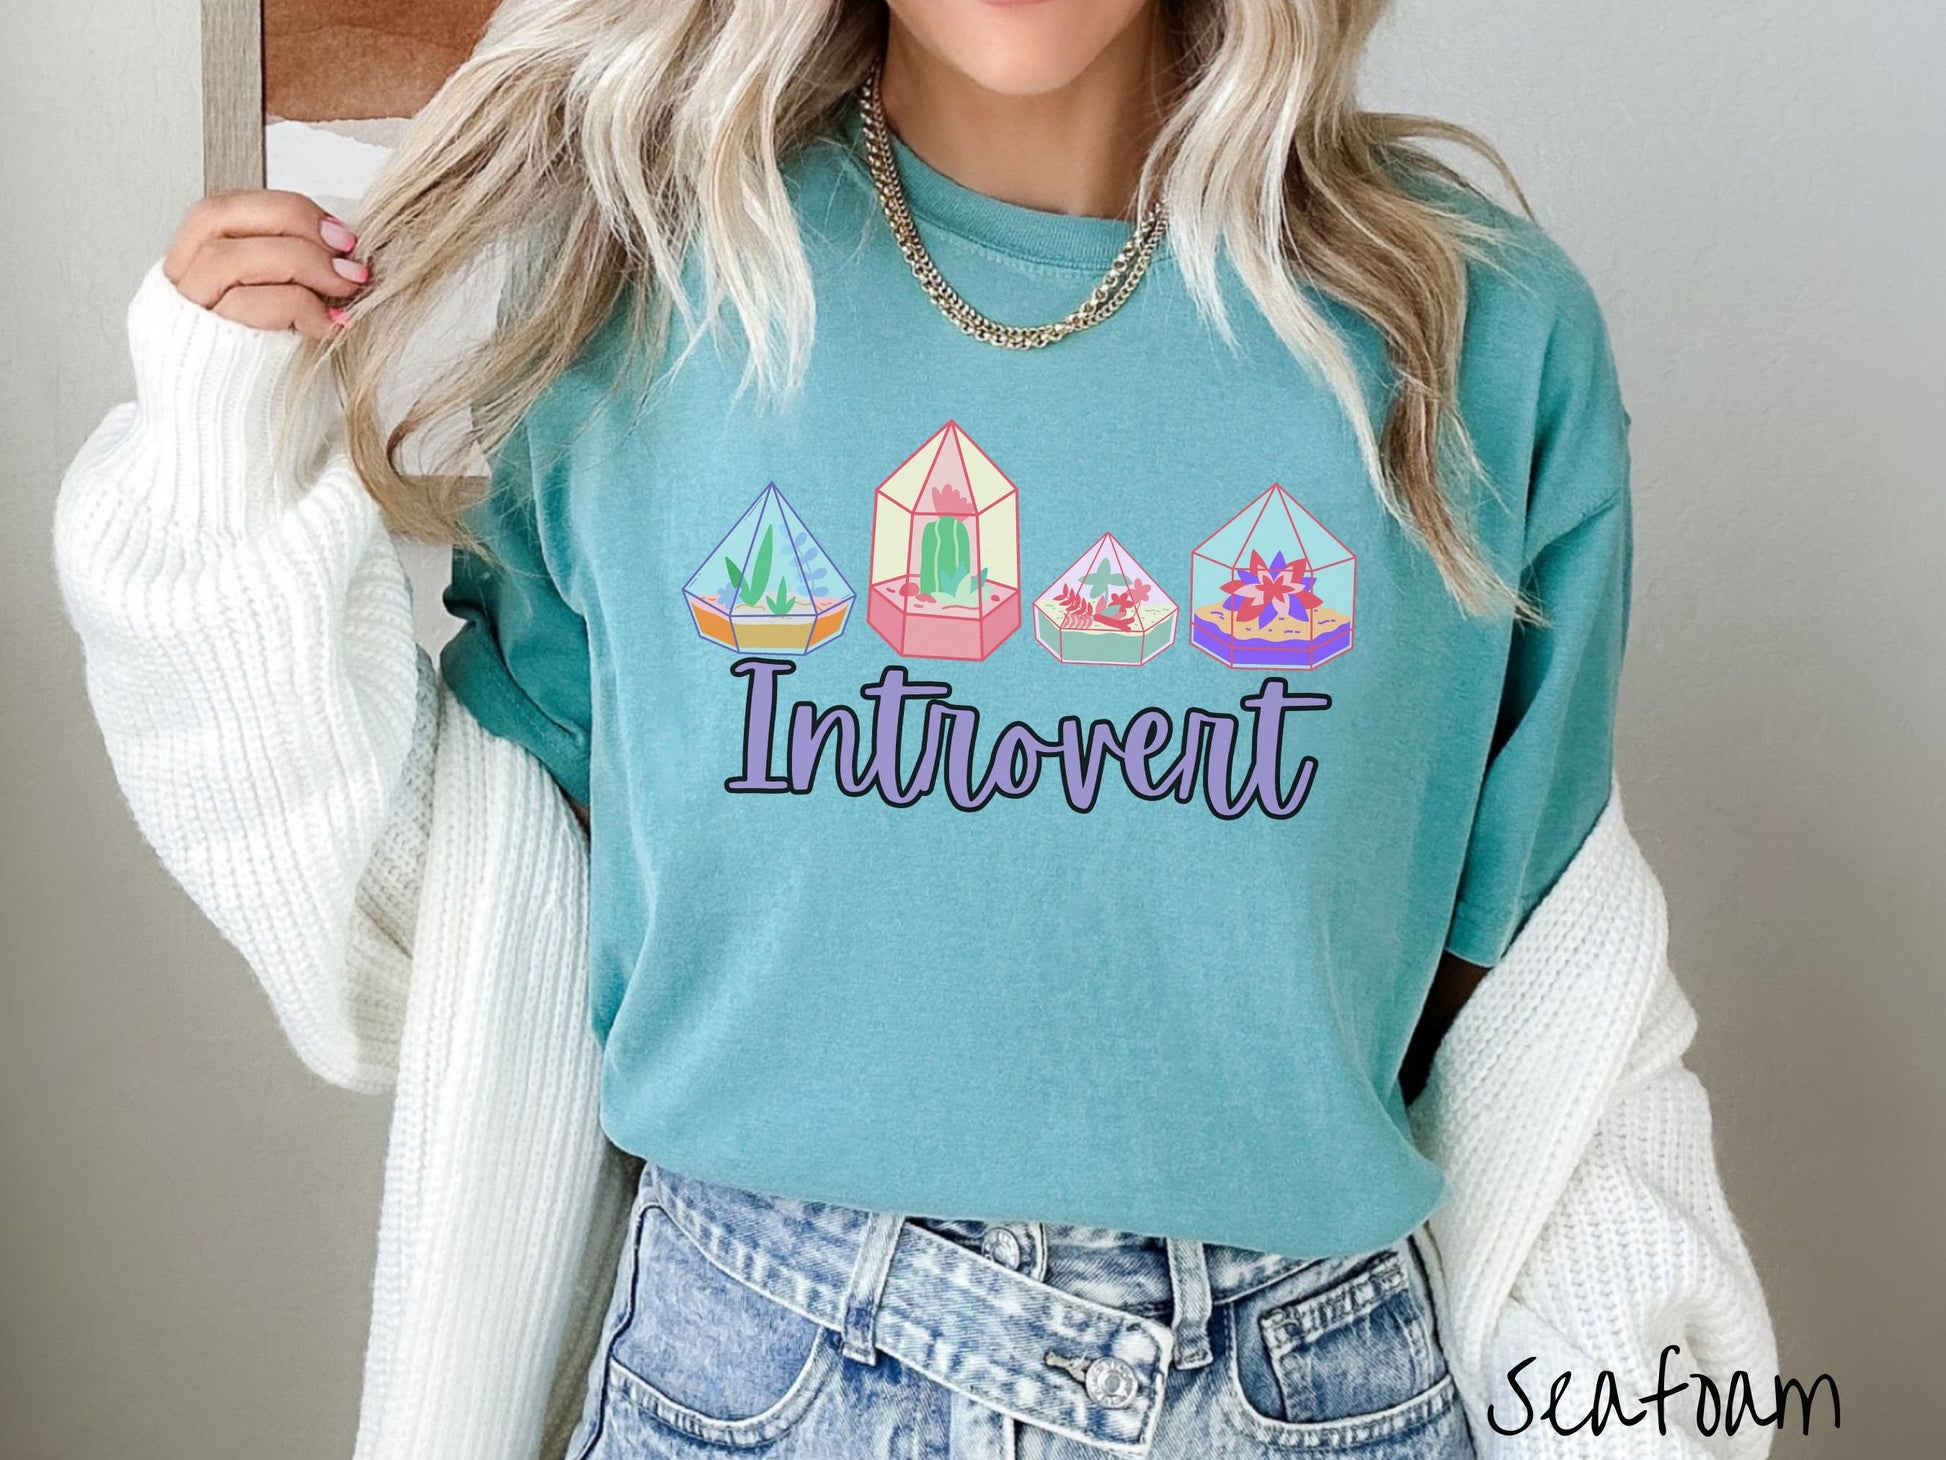 A woman wearing a cute, vintage seafoam colored Comfort Colors t-shirt with the text Introvert in purple font across the front. Above the text are four colorful plant terrariums with colorful flowers and cacti inside.